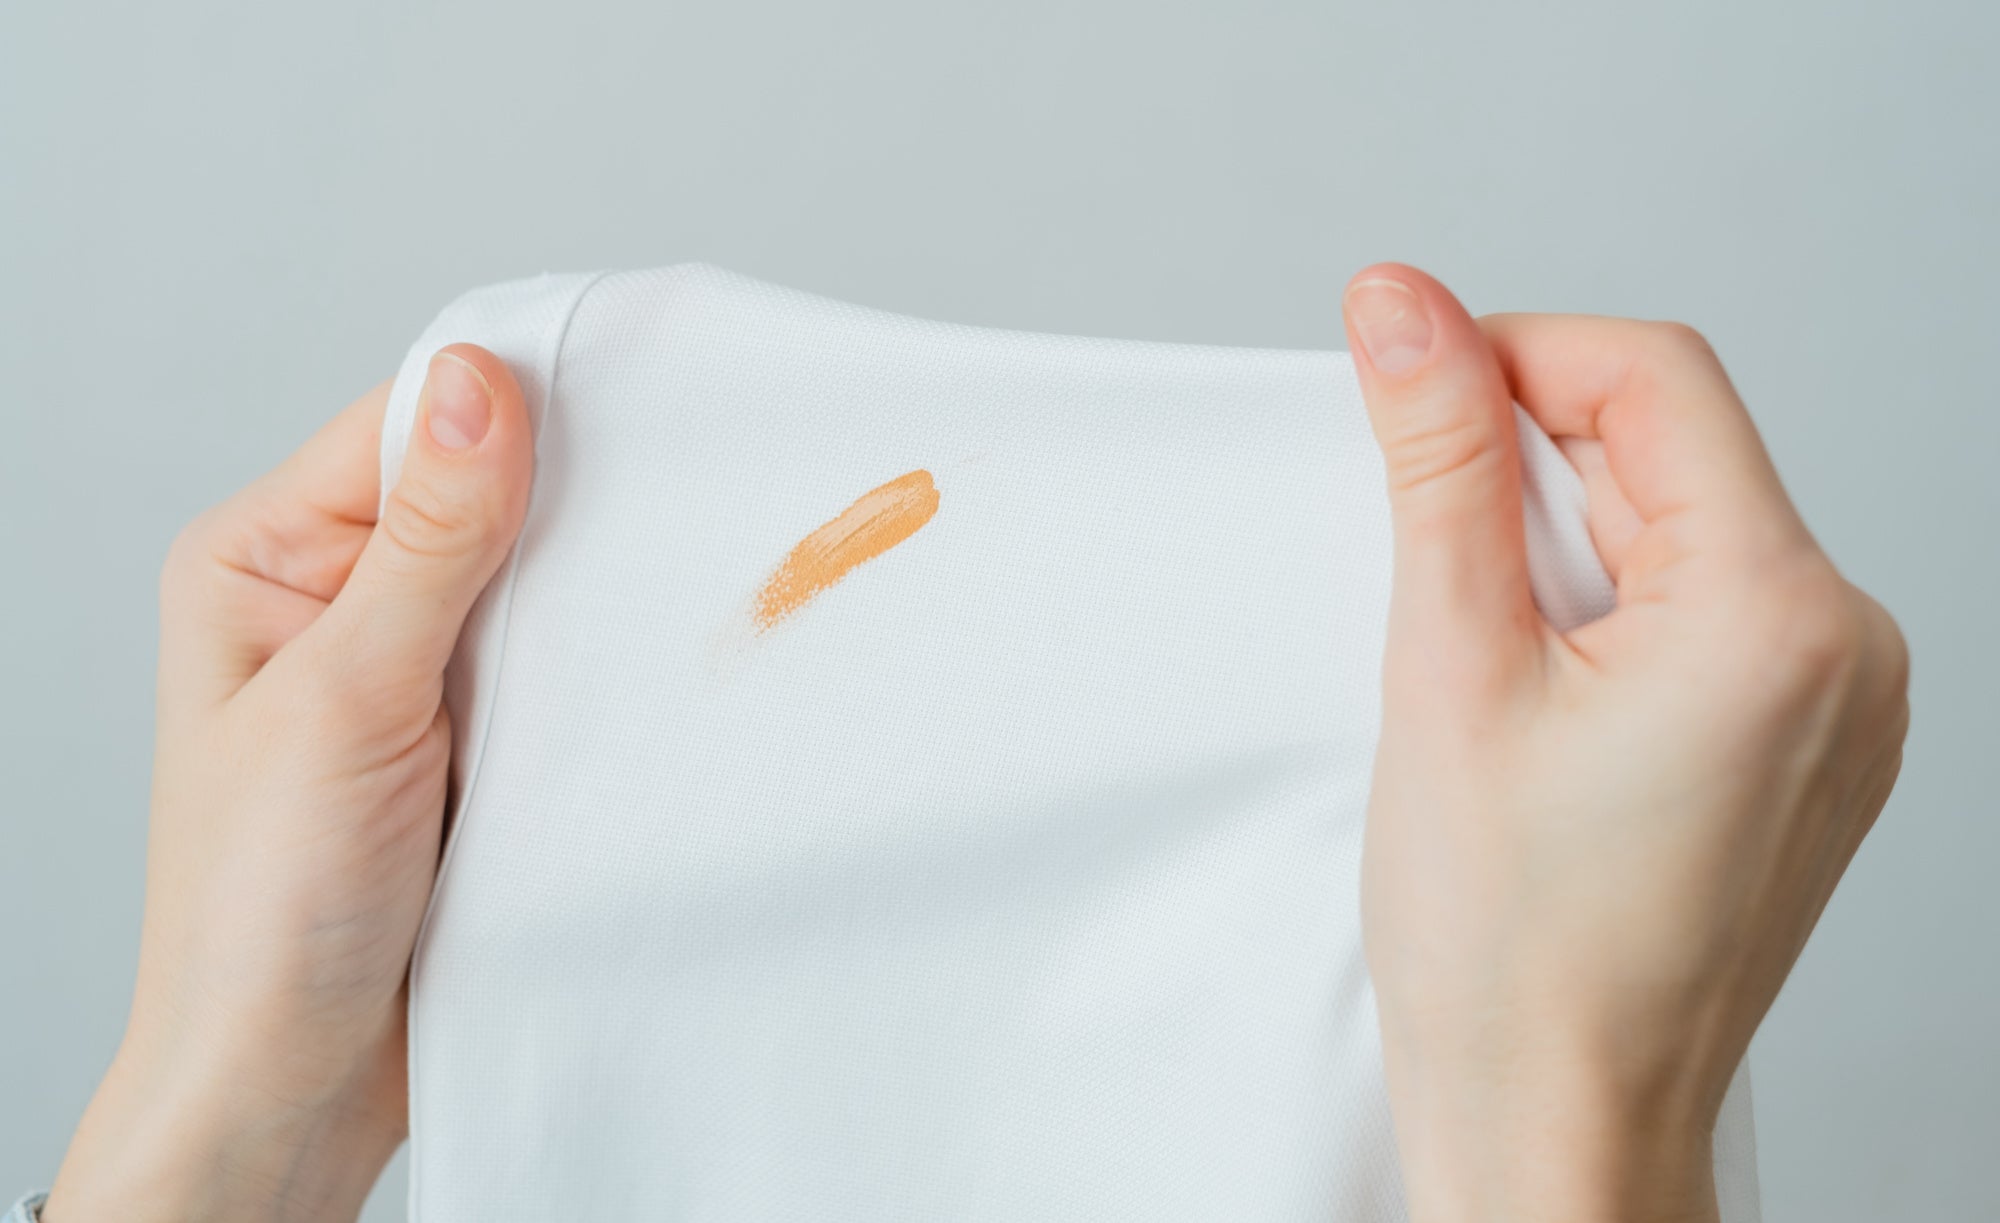 The Most Effective Ways to Get Makeup Stains Out of Your Clothes